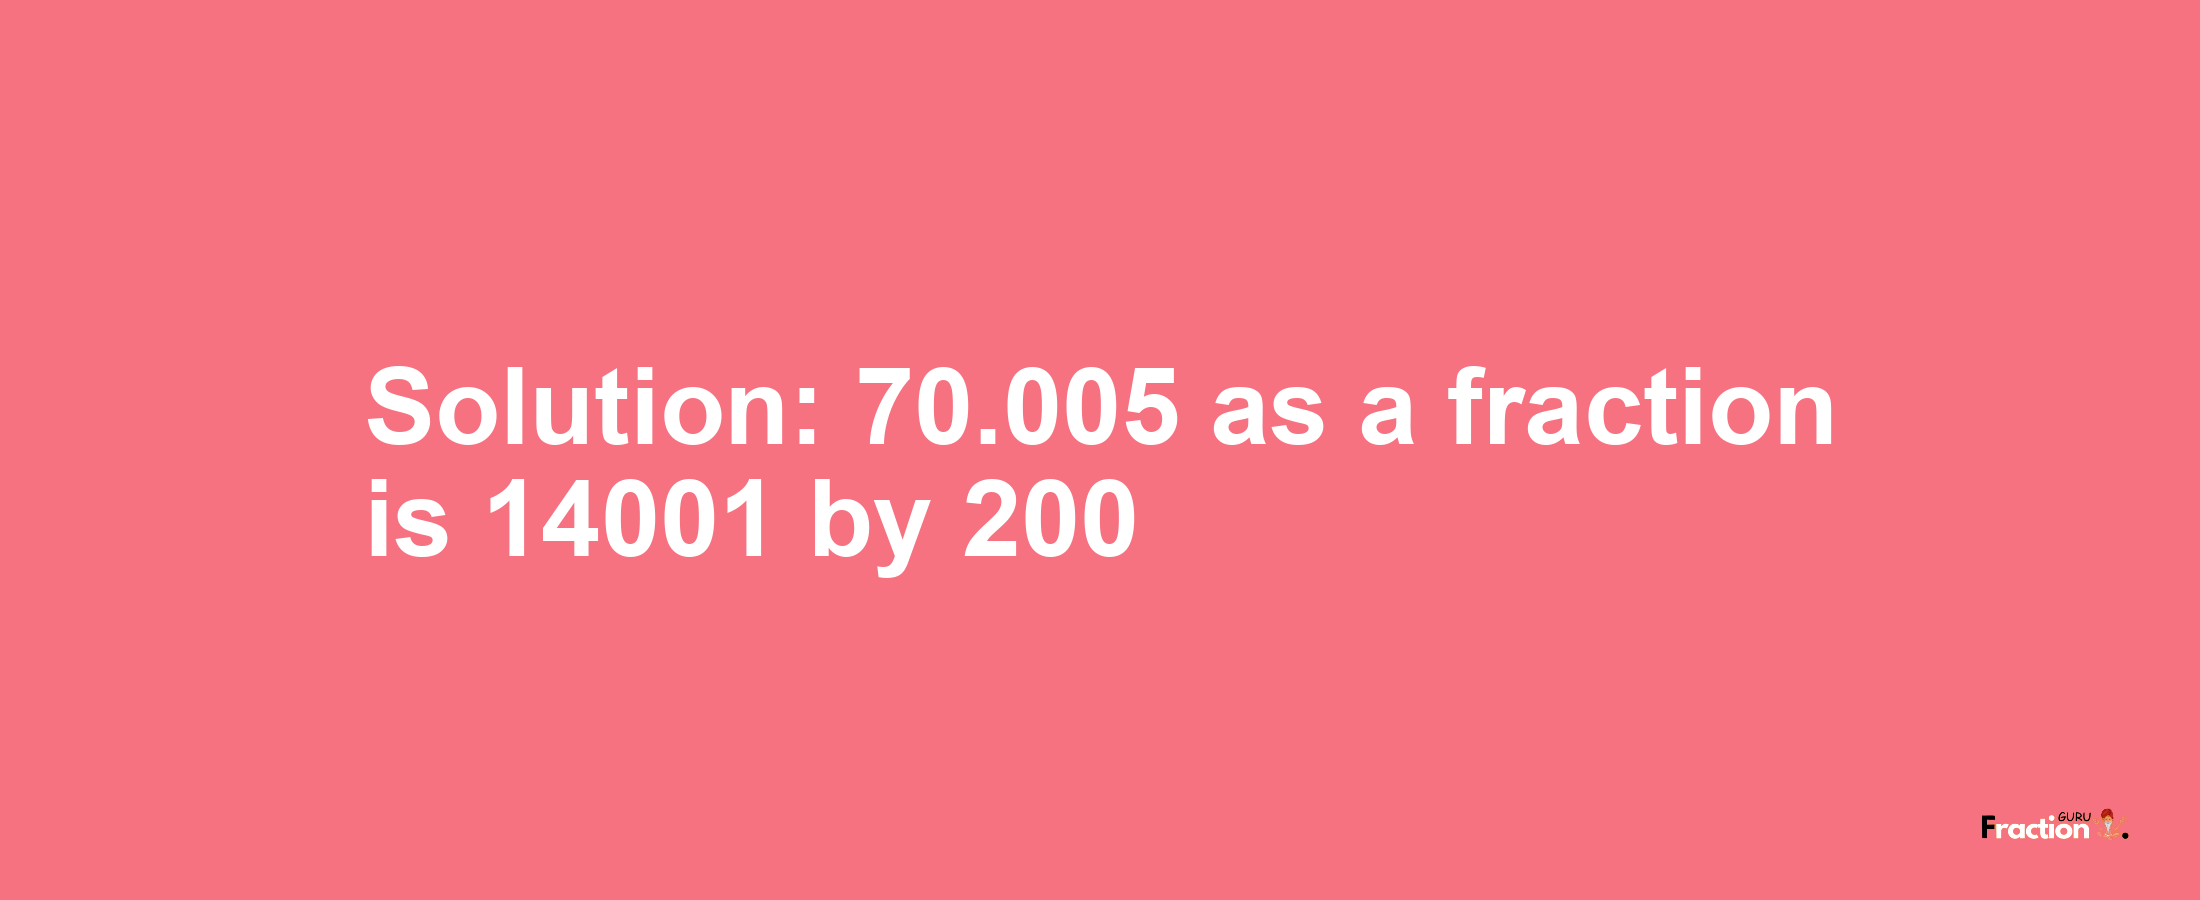 Solution:70.005 as a fraction is 14001/200